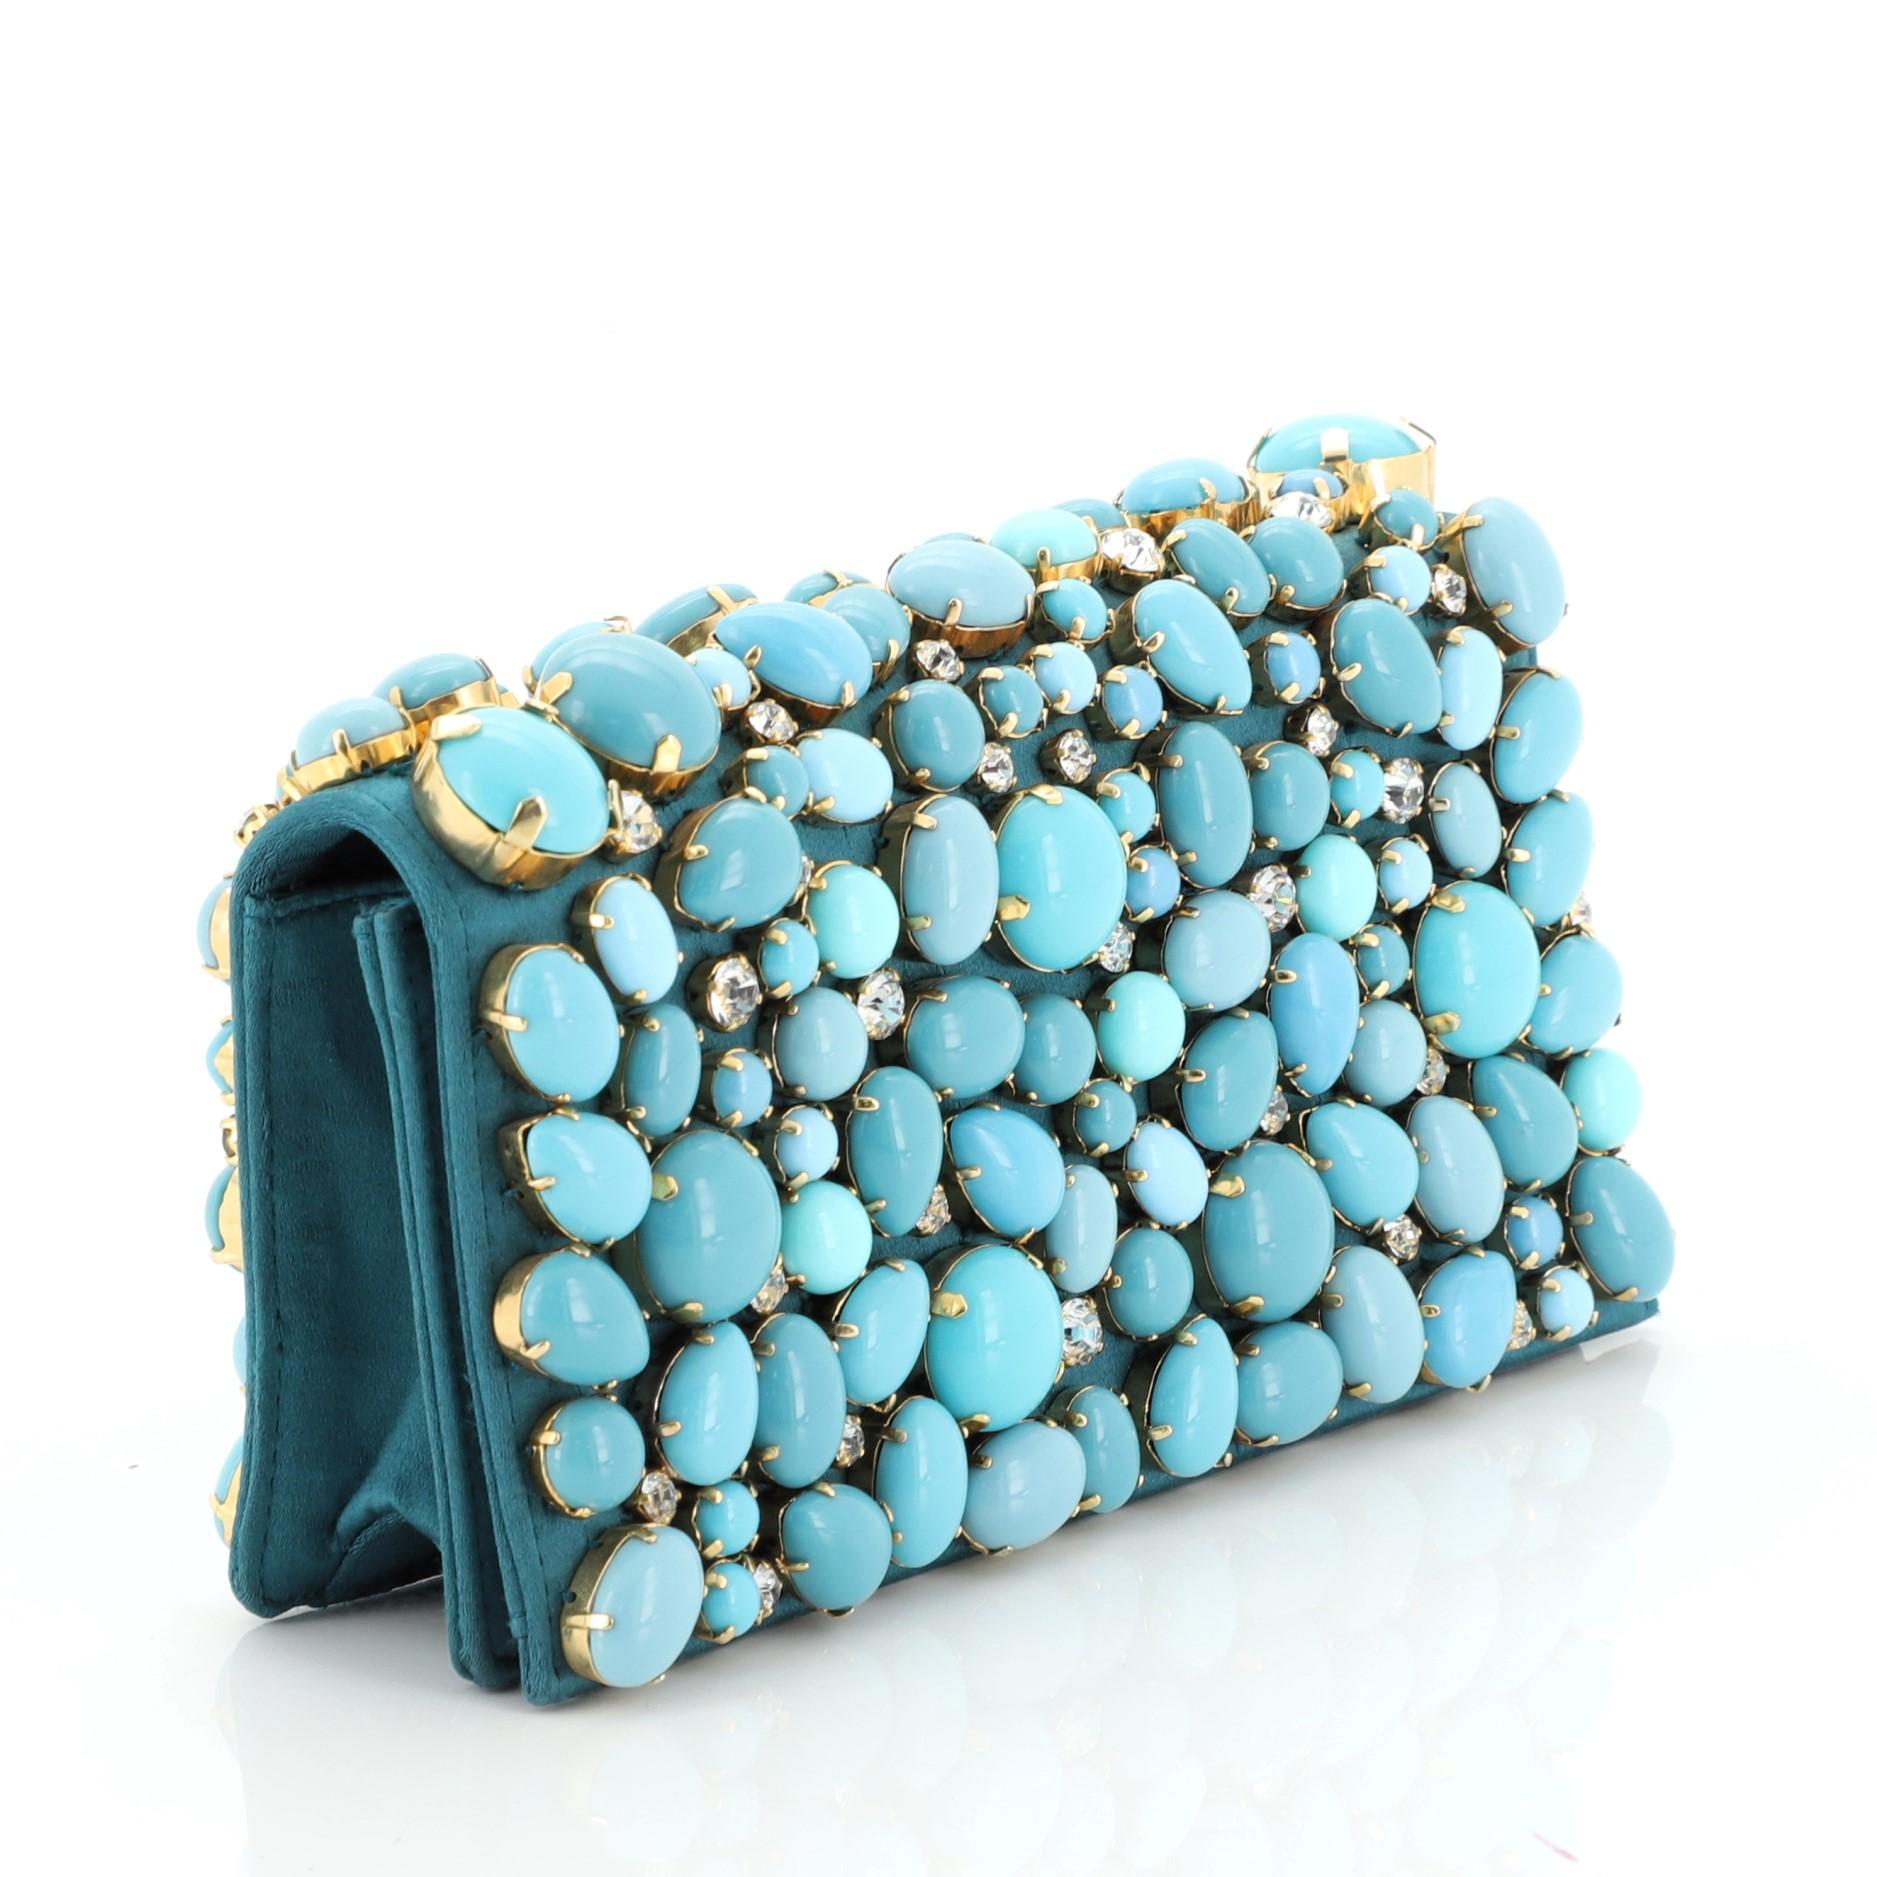 This Prada Raso Pietre Clutch Embellished Satin, crafted from green embellished satin, features tonal stones embellishment. Its snap closure opens to a green satin interior with slip pocket. 

Estimated Retail Price: $2,500
Condition: Very good.